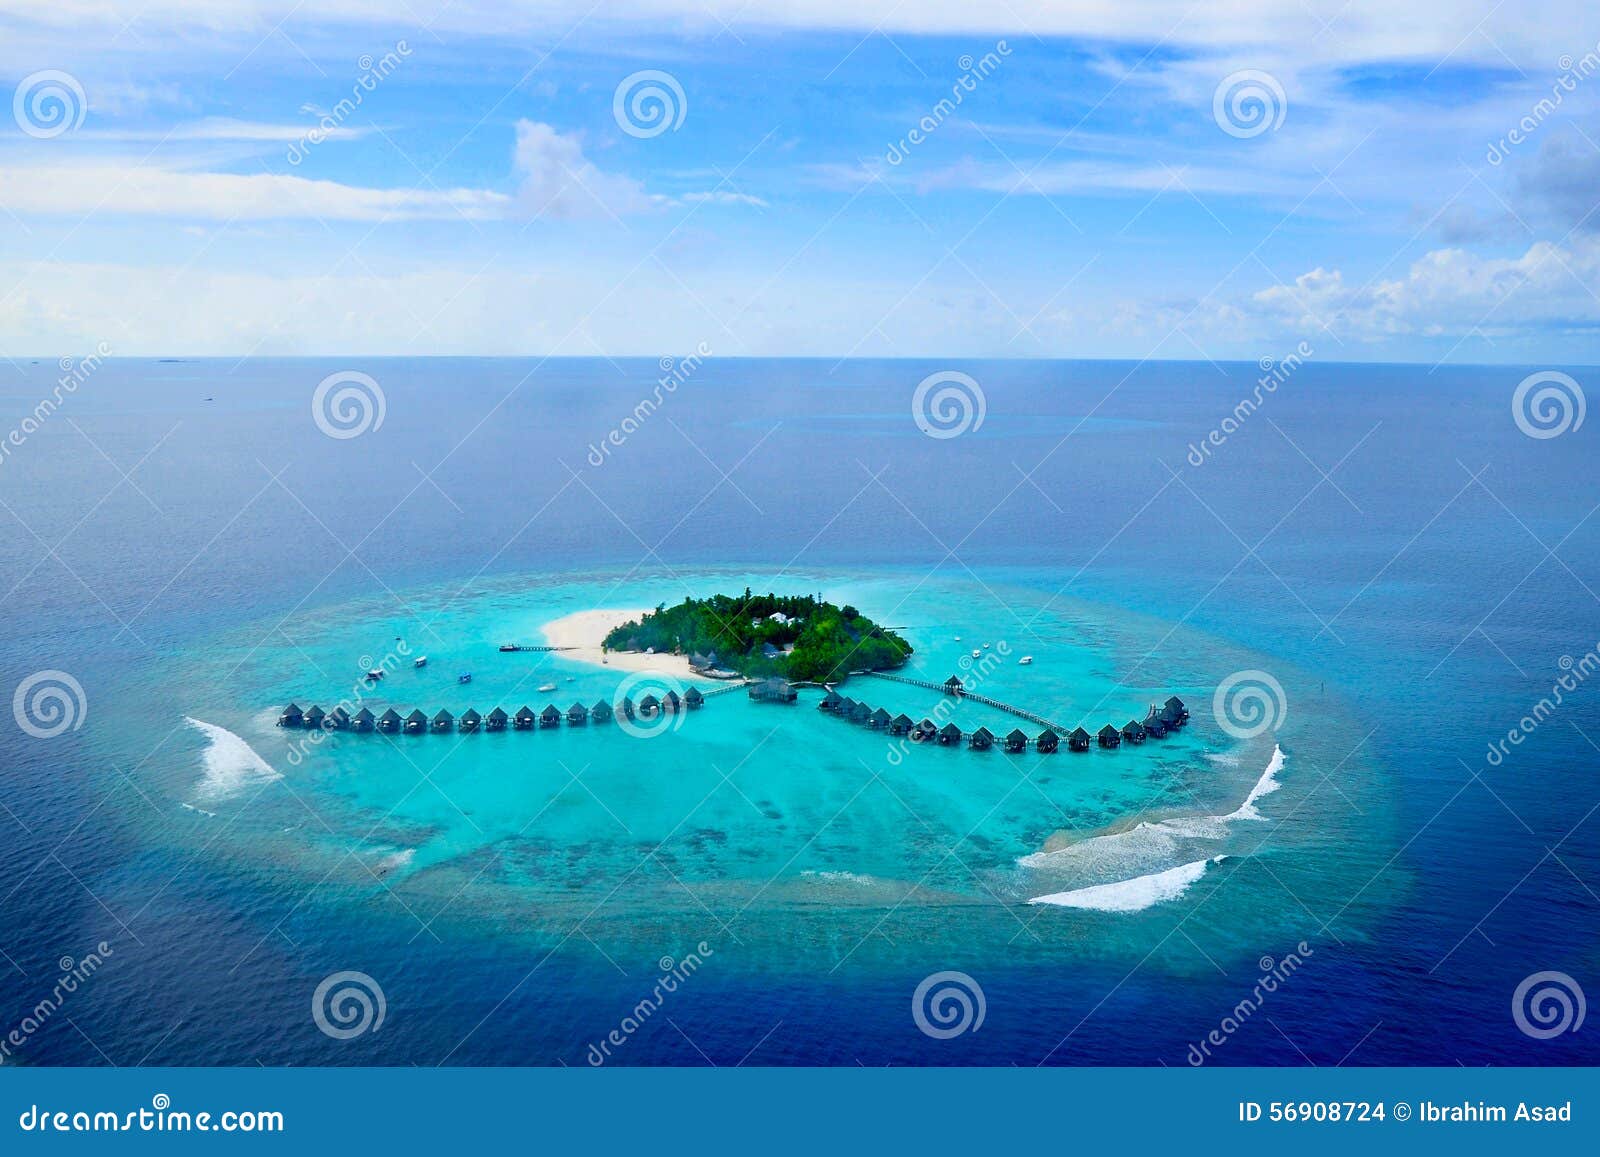 addu atoll or the seenu atoll, the south most atoll of the maldives islands